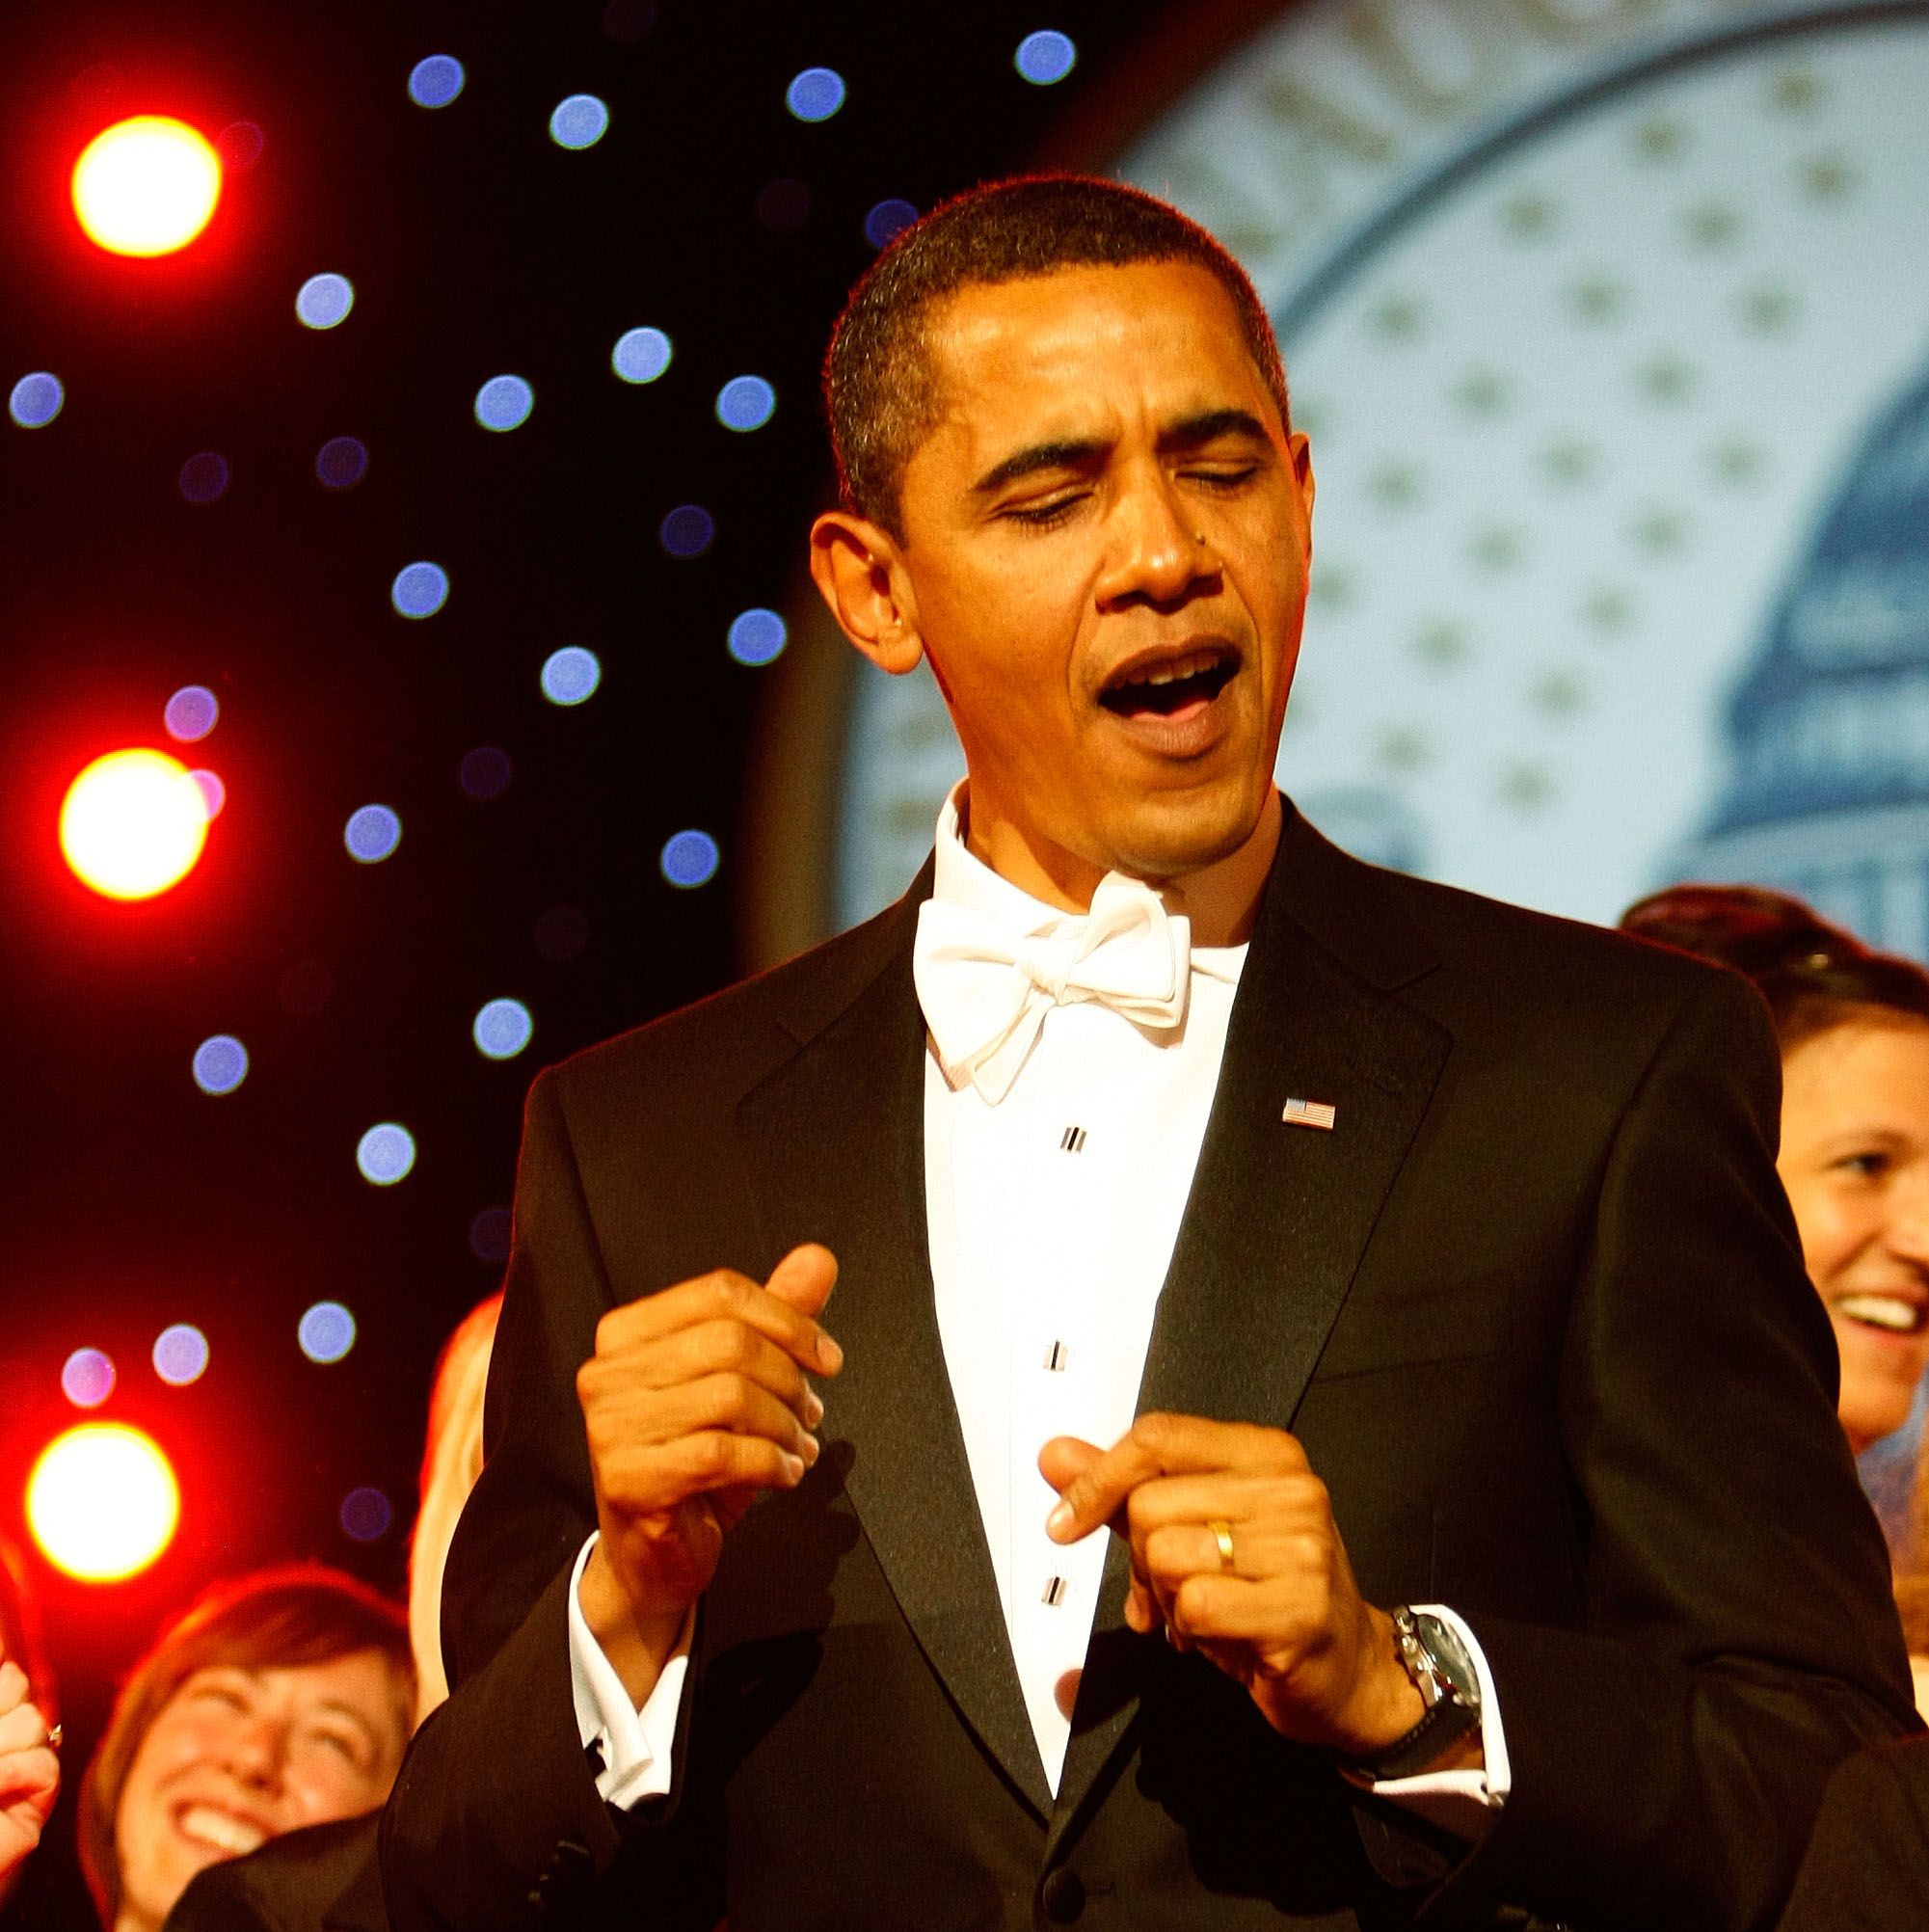 Barack Obama Shares Another Great Playlist of Songs He's Maybe Heard